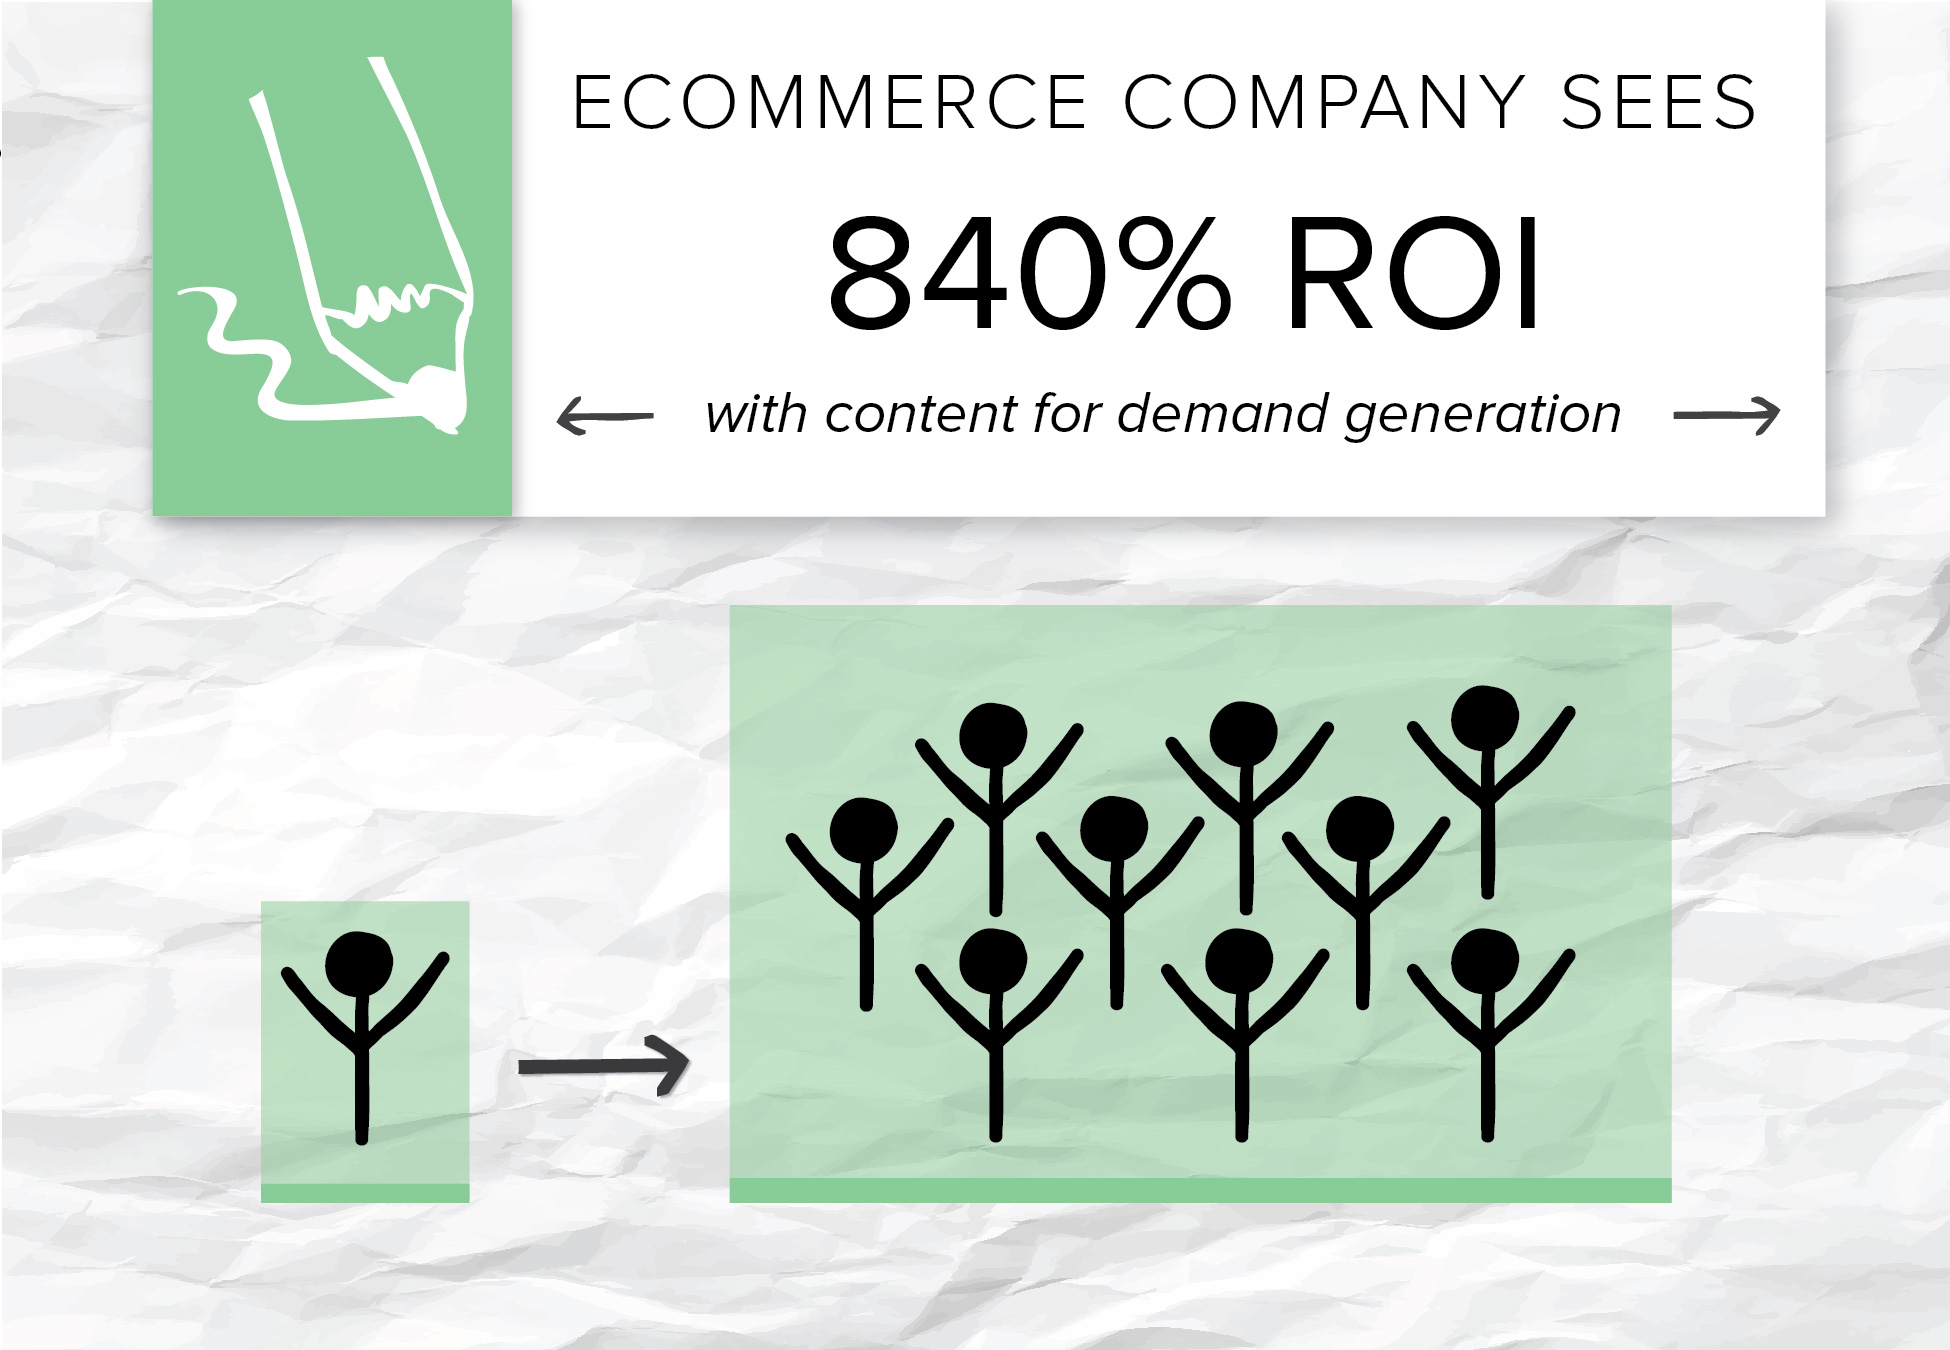 By creating blog content, this ecommerce company generated 840 percent ROI on its content marketing services.